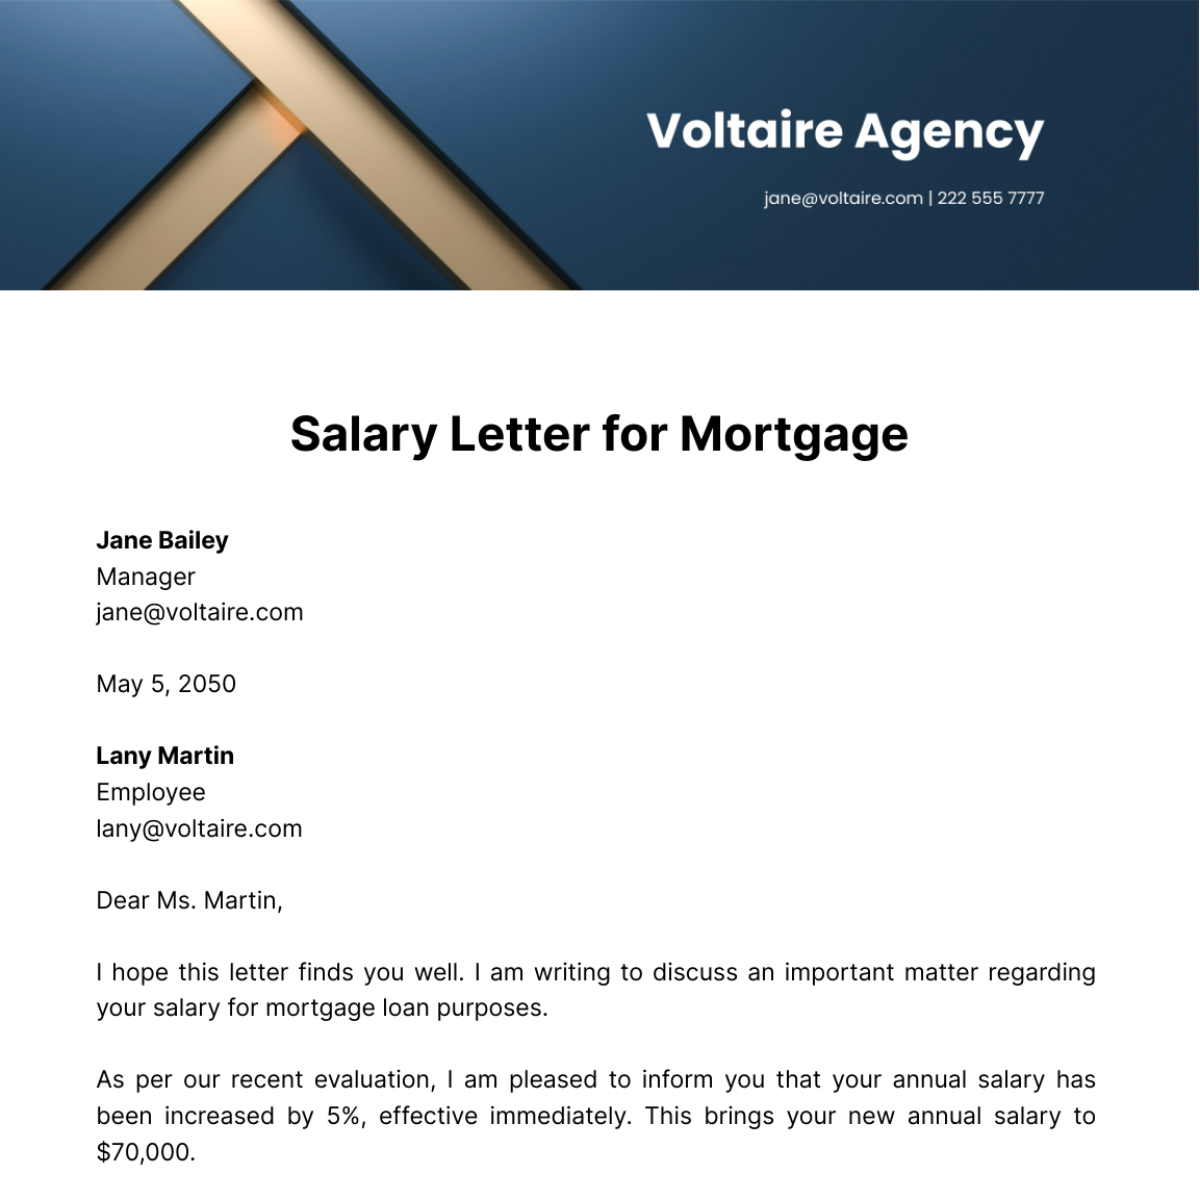 Salary Letter for Mortgage Template